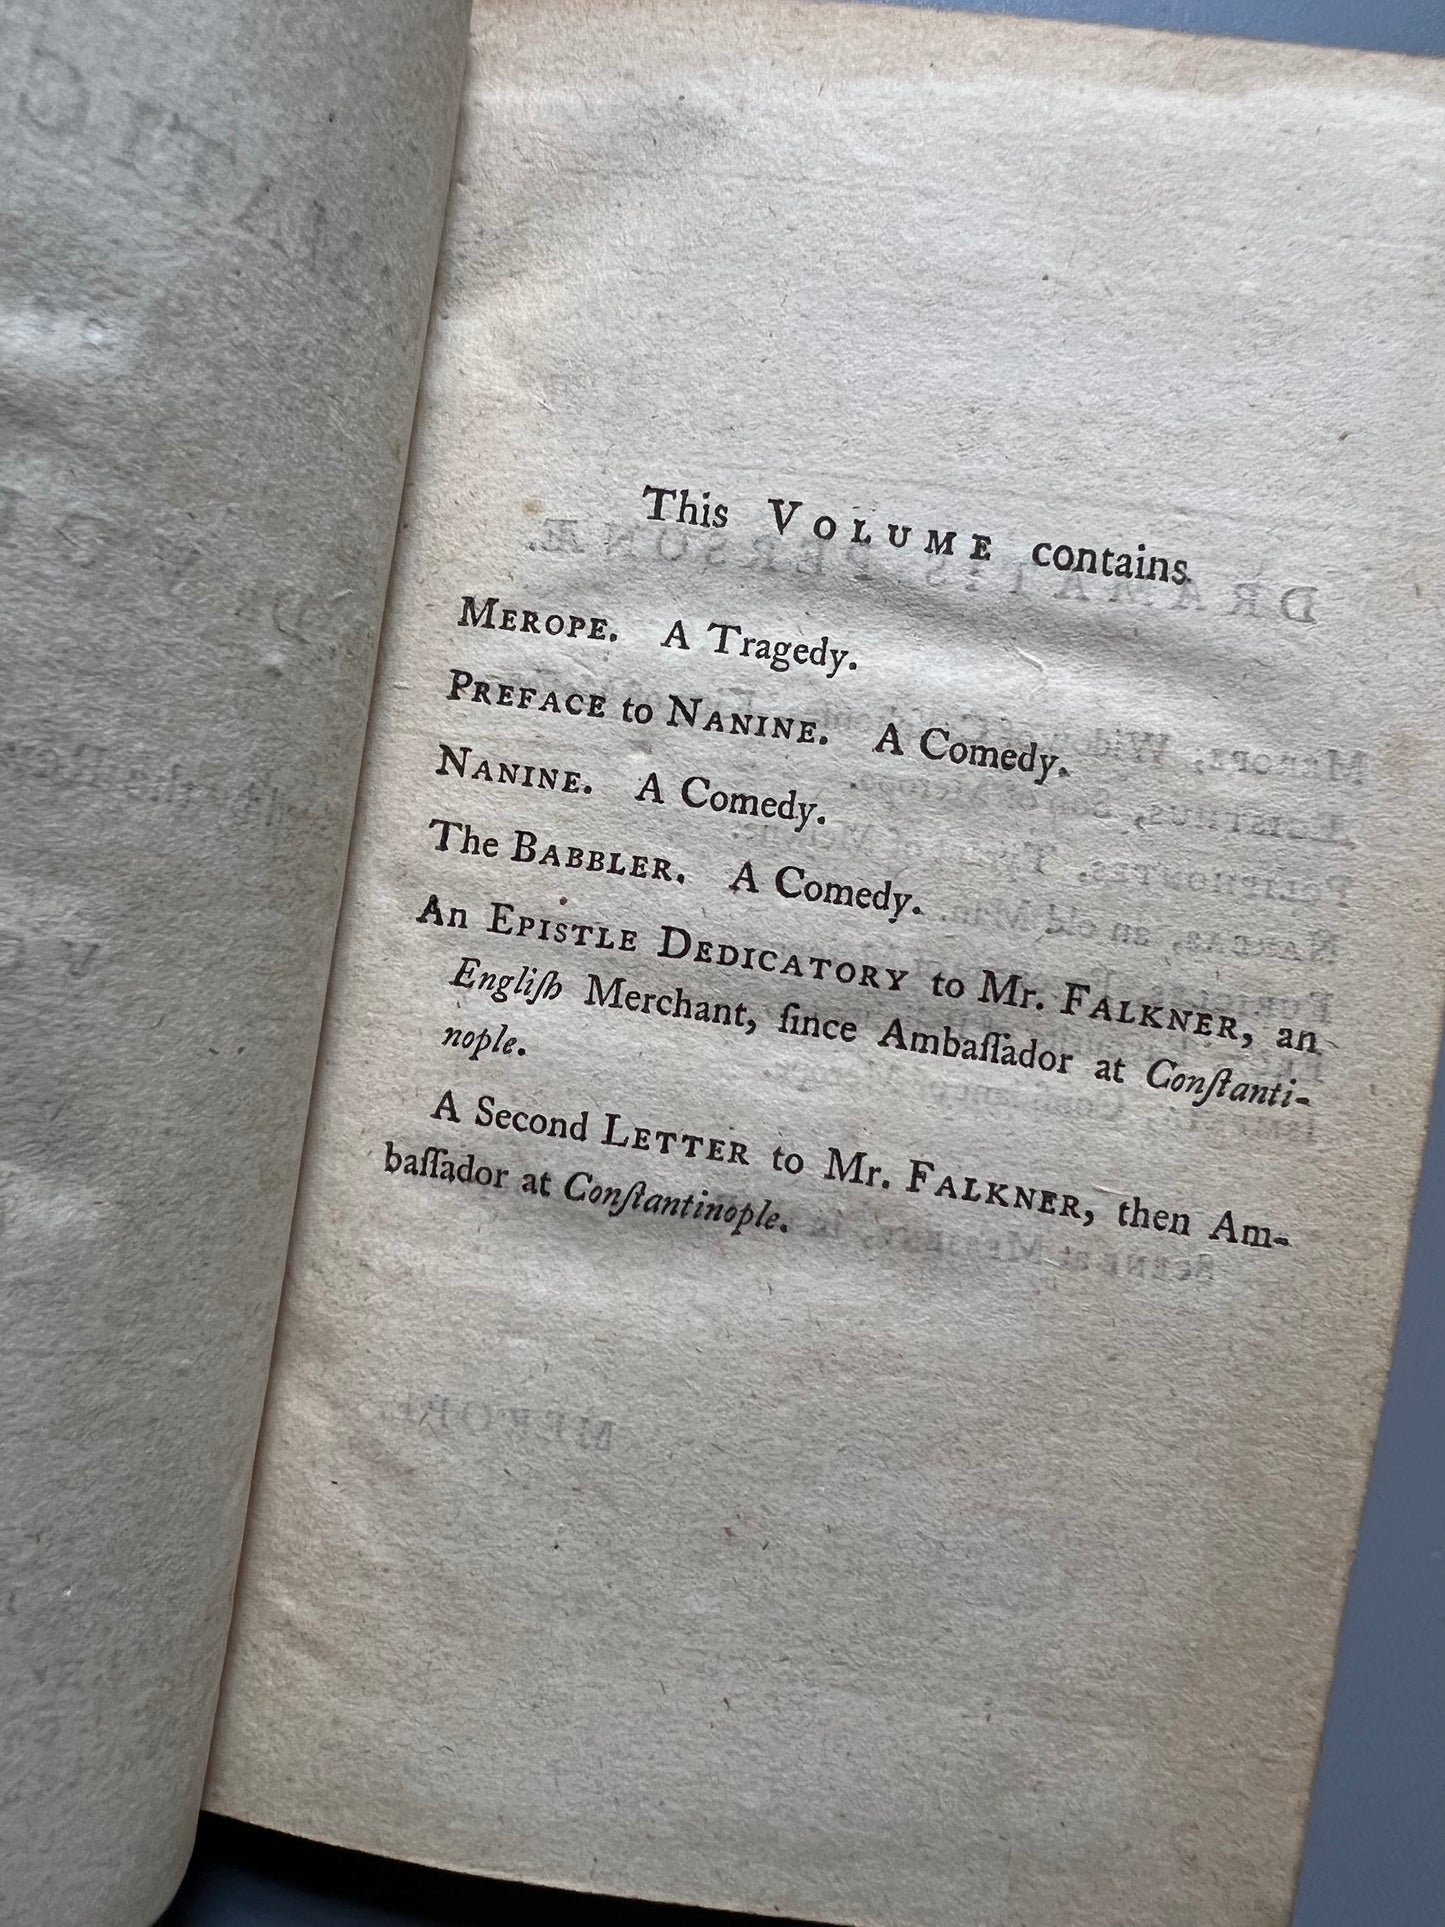 The dramatic works of Voltaire, vol. IV - Londres, 1762